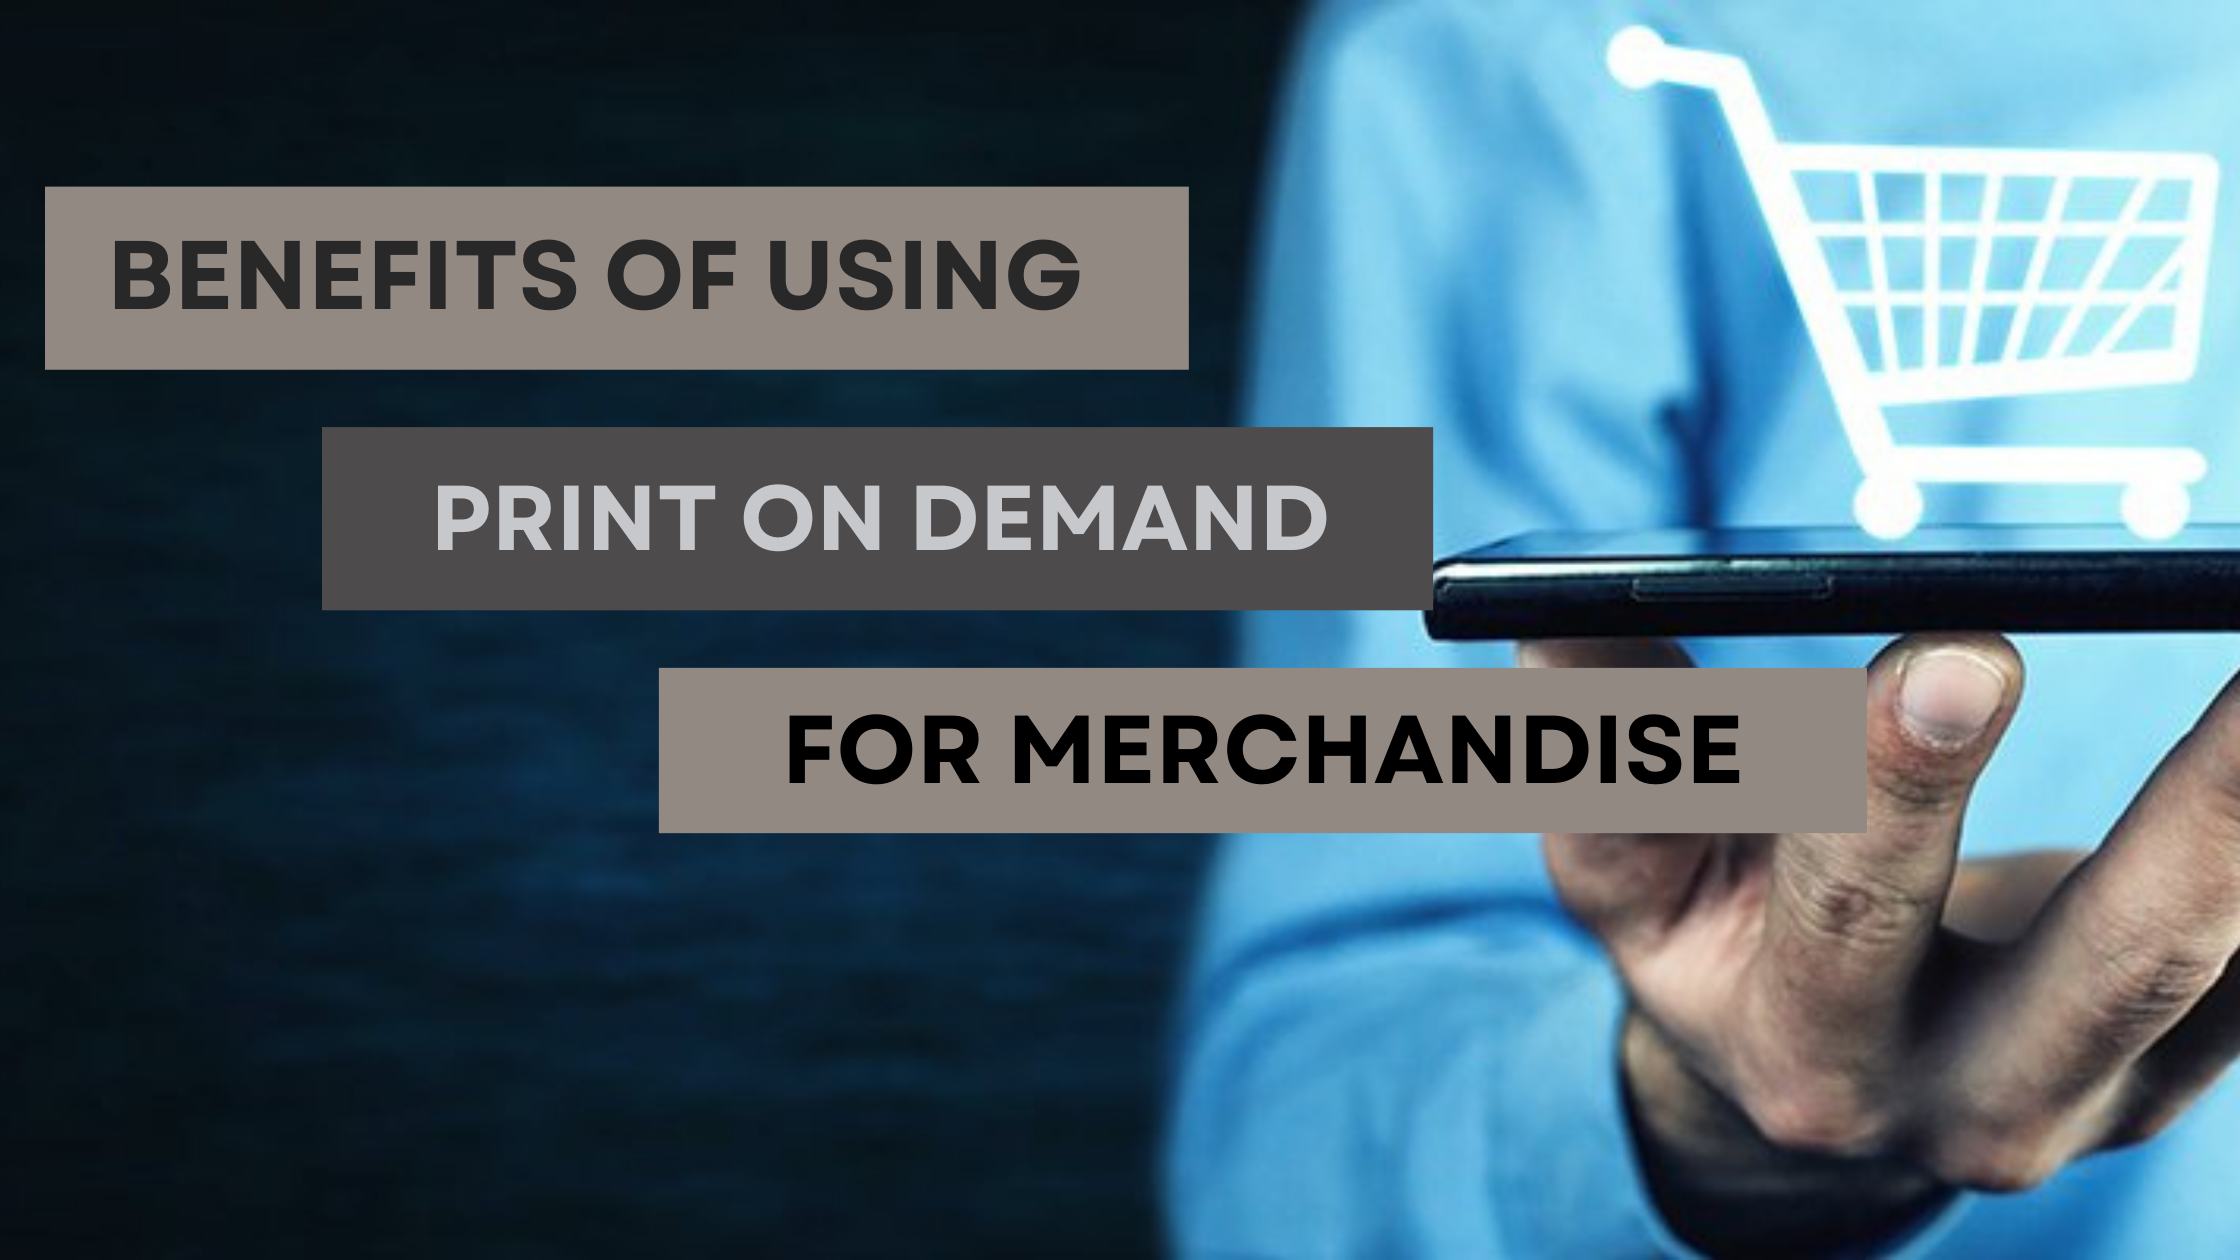 The Benefits of Using Print on Demand for Your Merchandise